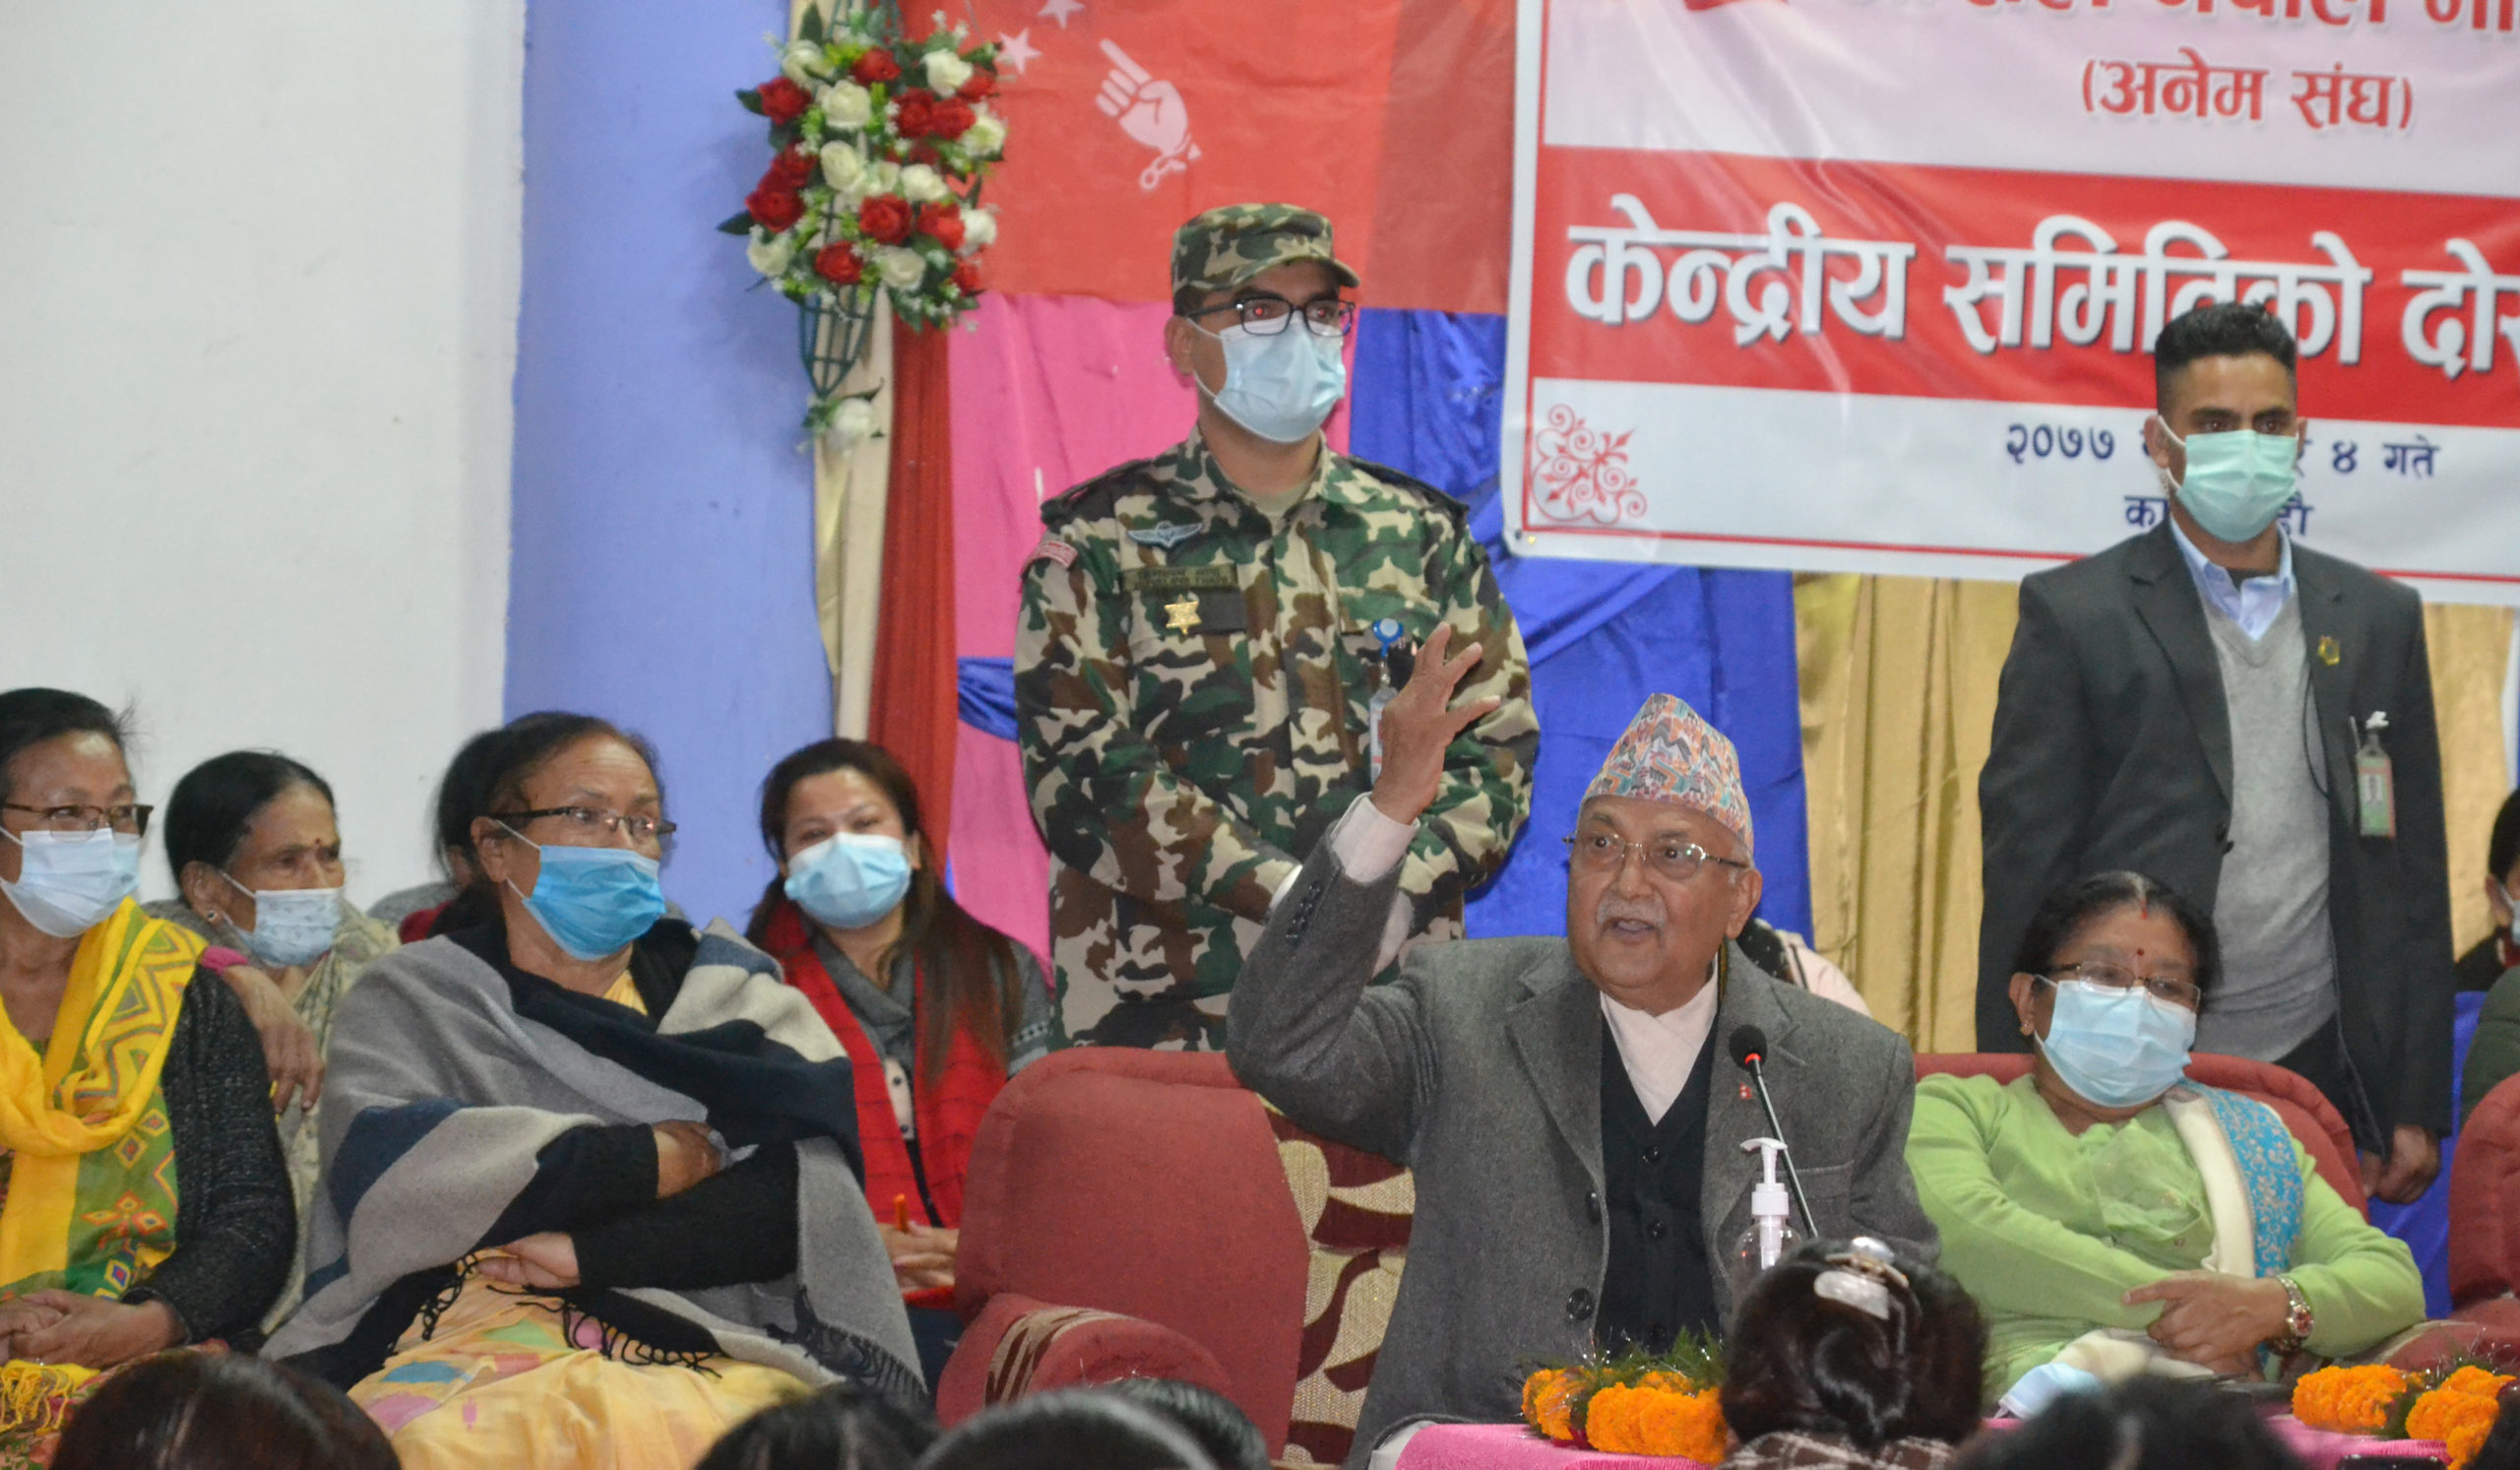 HoR dissolution in line with constitution, national and int’l practices: PM Oli